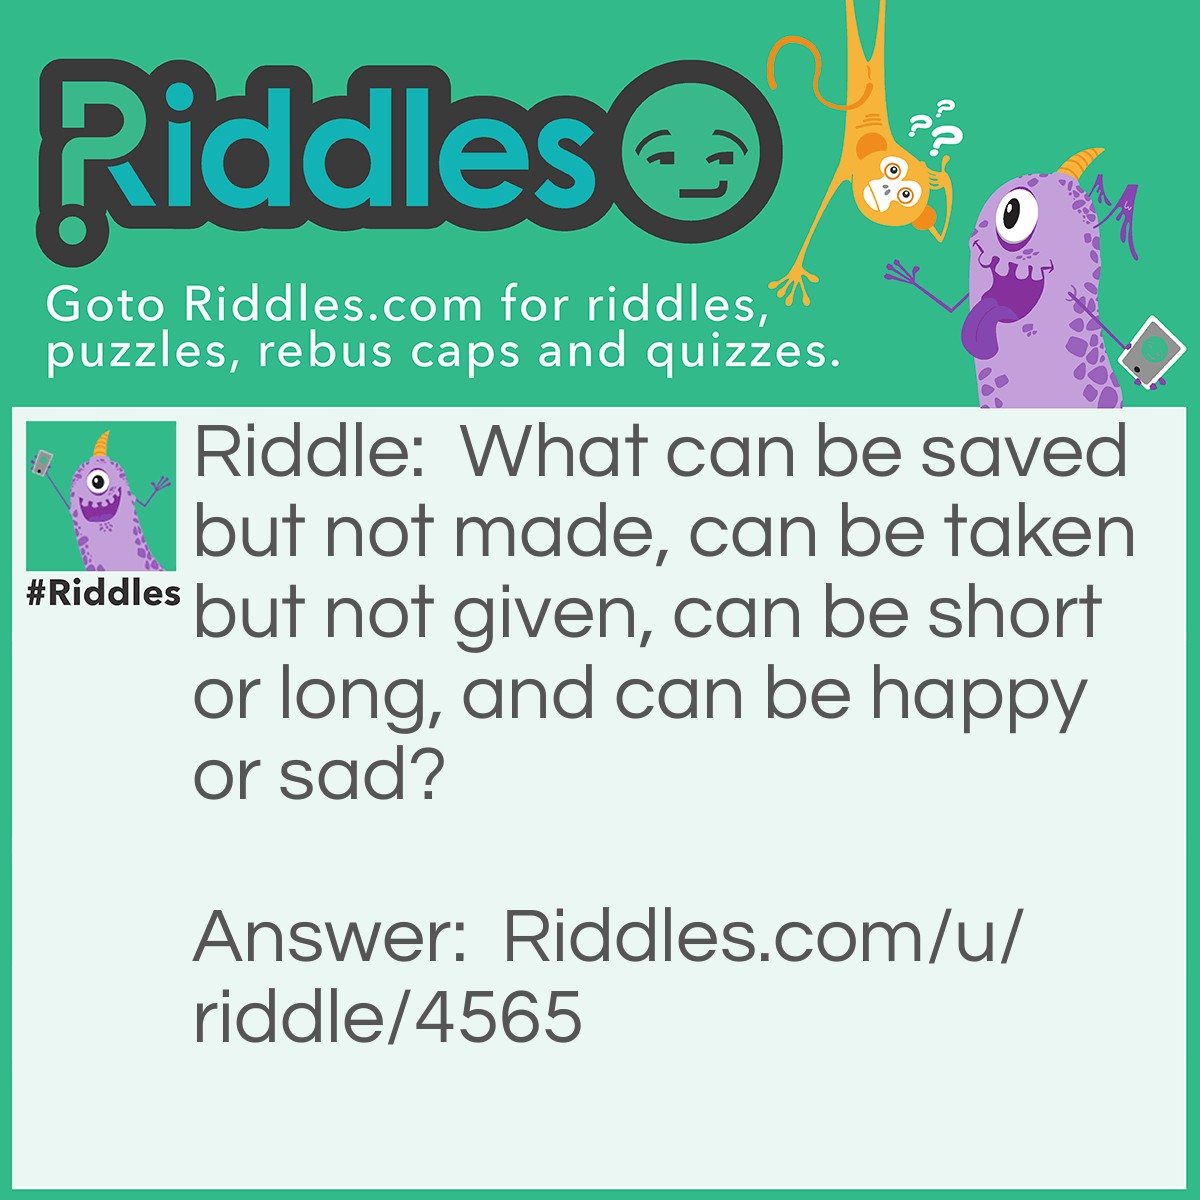 Riddle: What can be saved but not made, can be taken but not given, can be short or long, and can be happy or sad? Answer: Life.